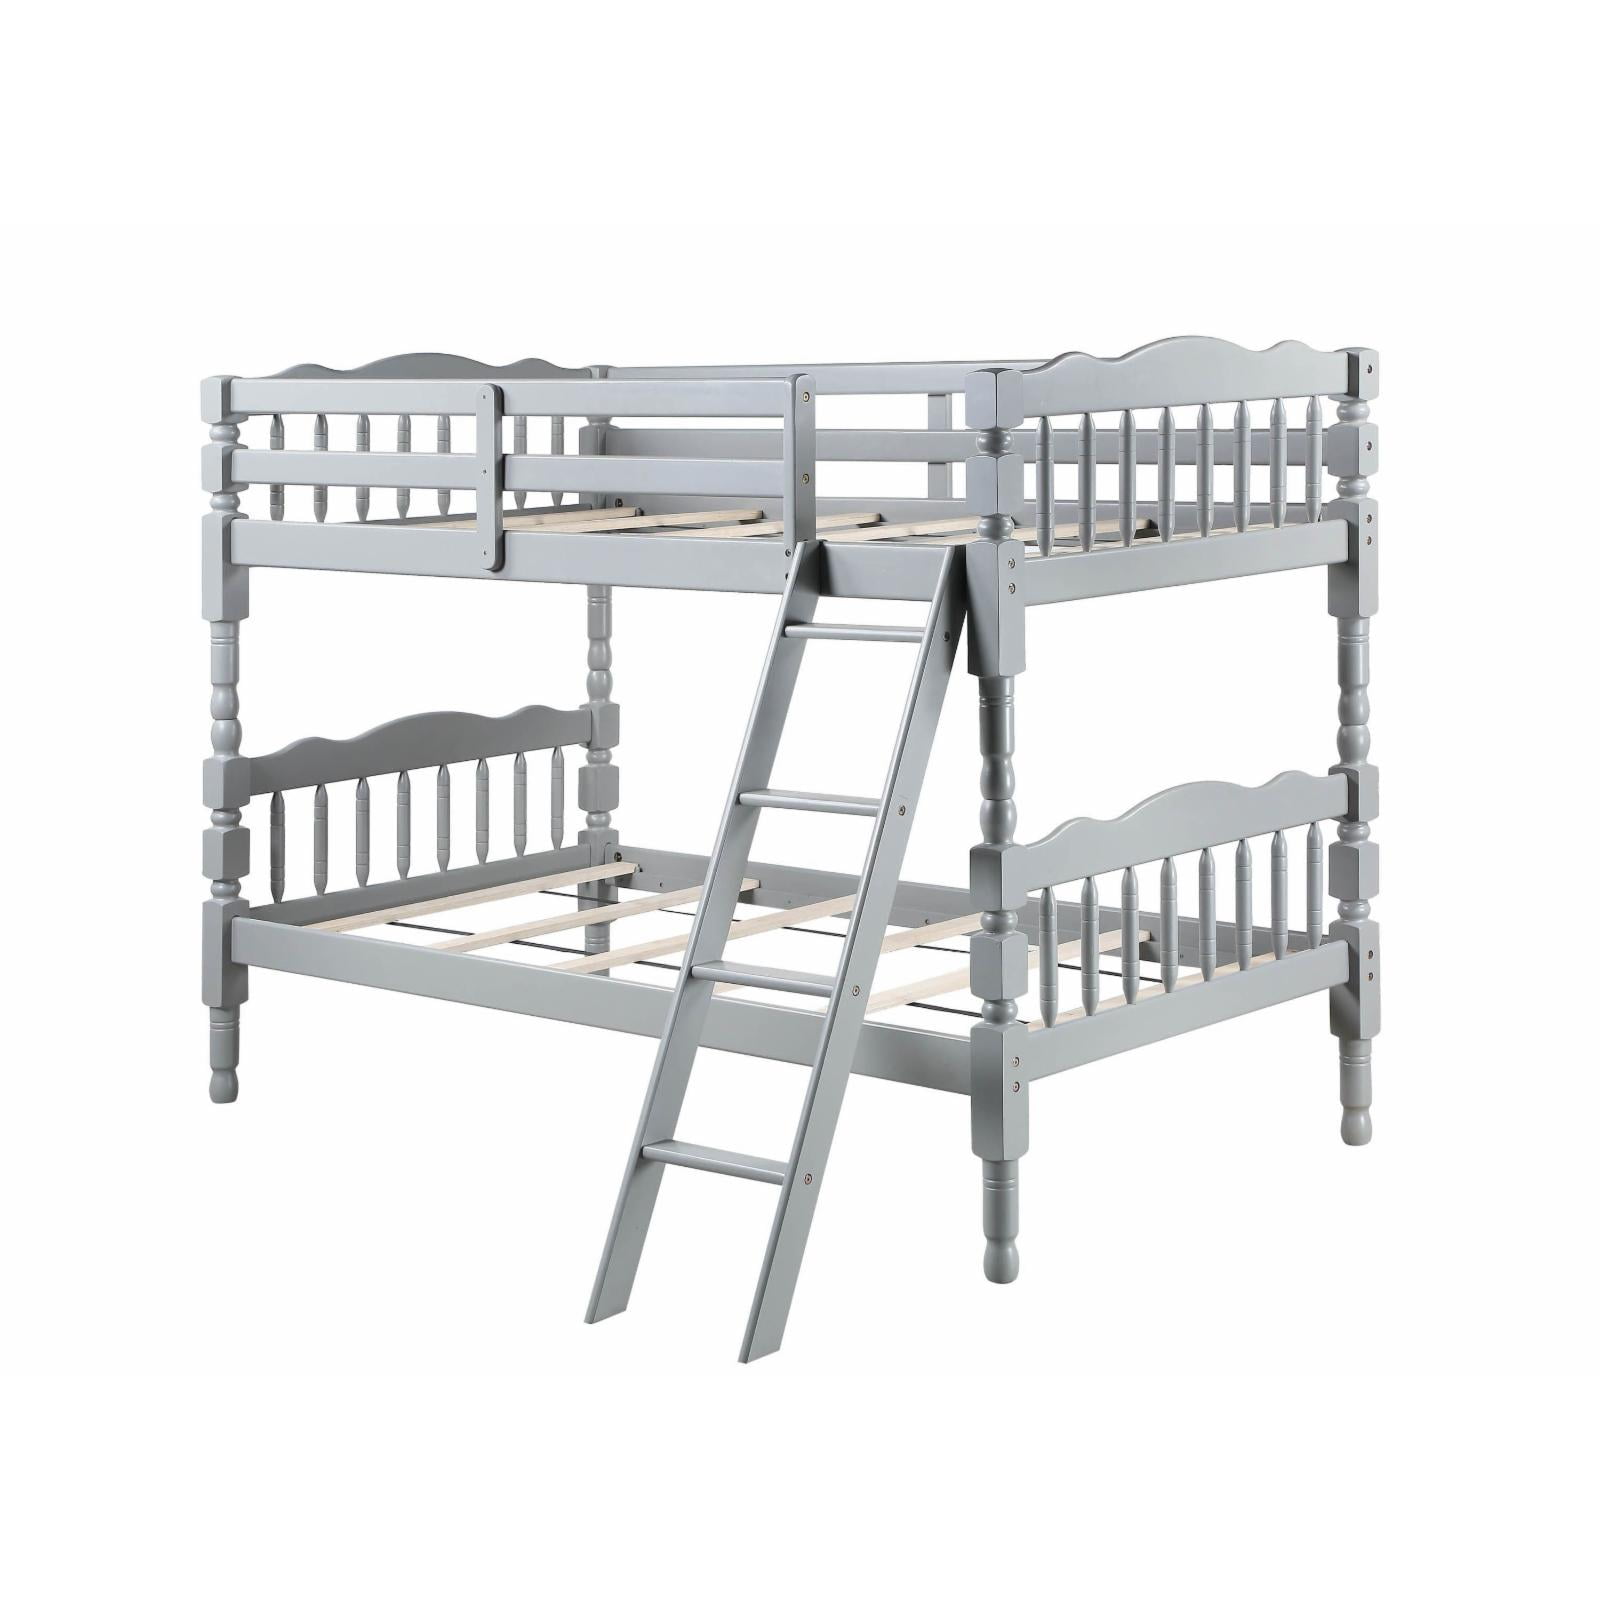 Picture of Acme Furniture BD00864 82 x 43 x 60 in. Homestead Bunk Bed, Gray - Twin Size